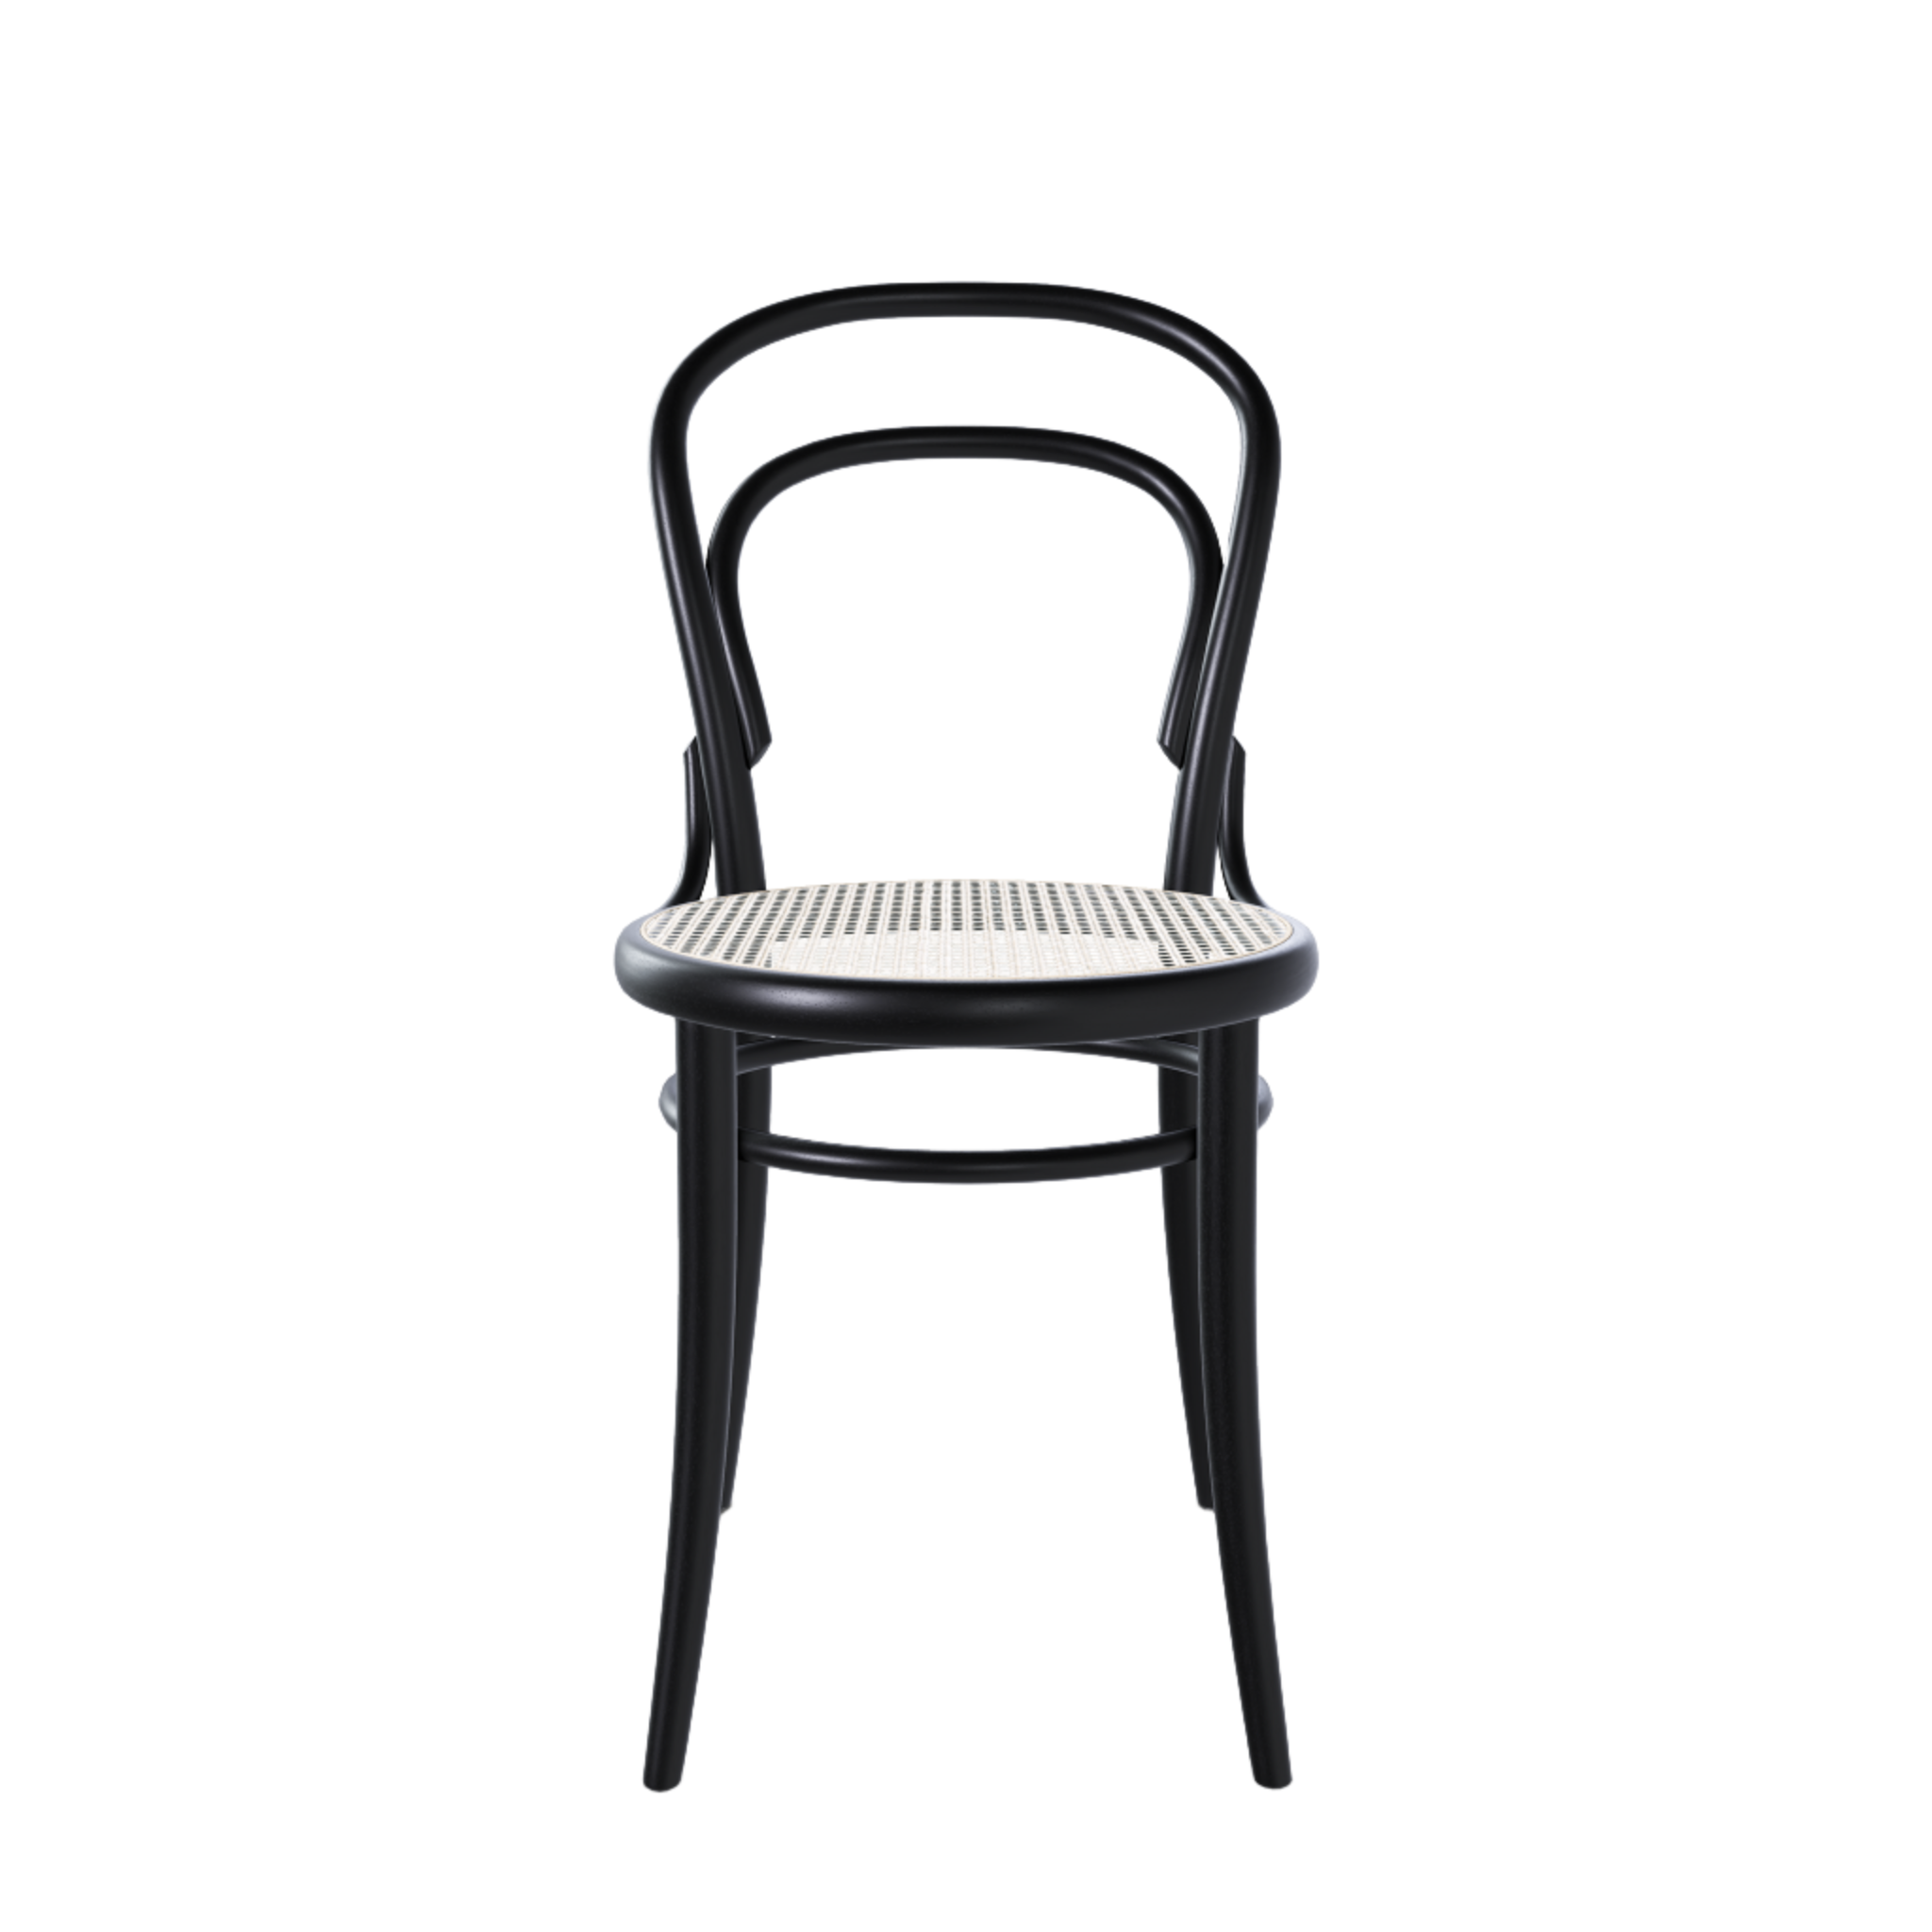 Ton 14 Dining Chair with cane seat in black grain